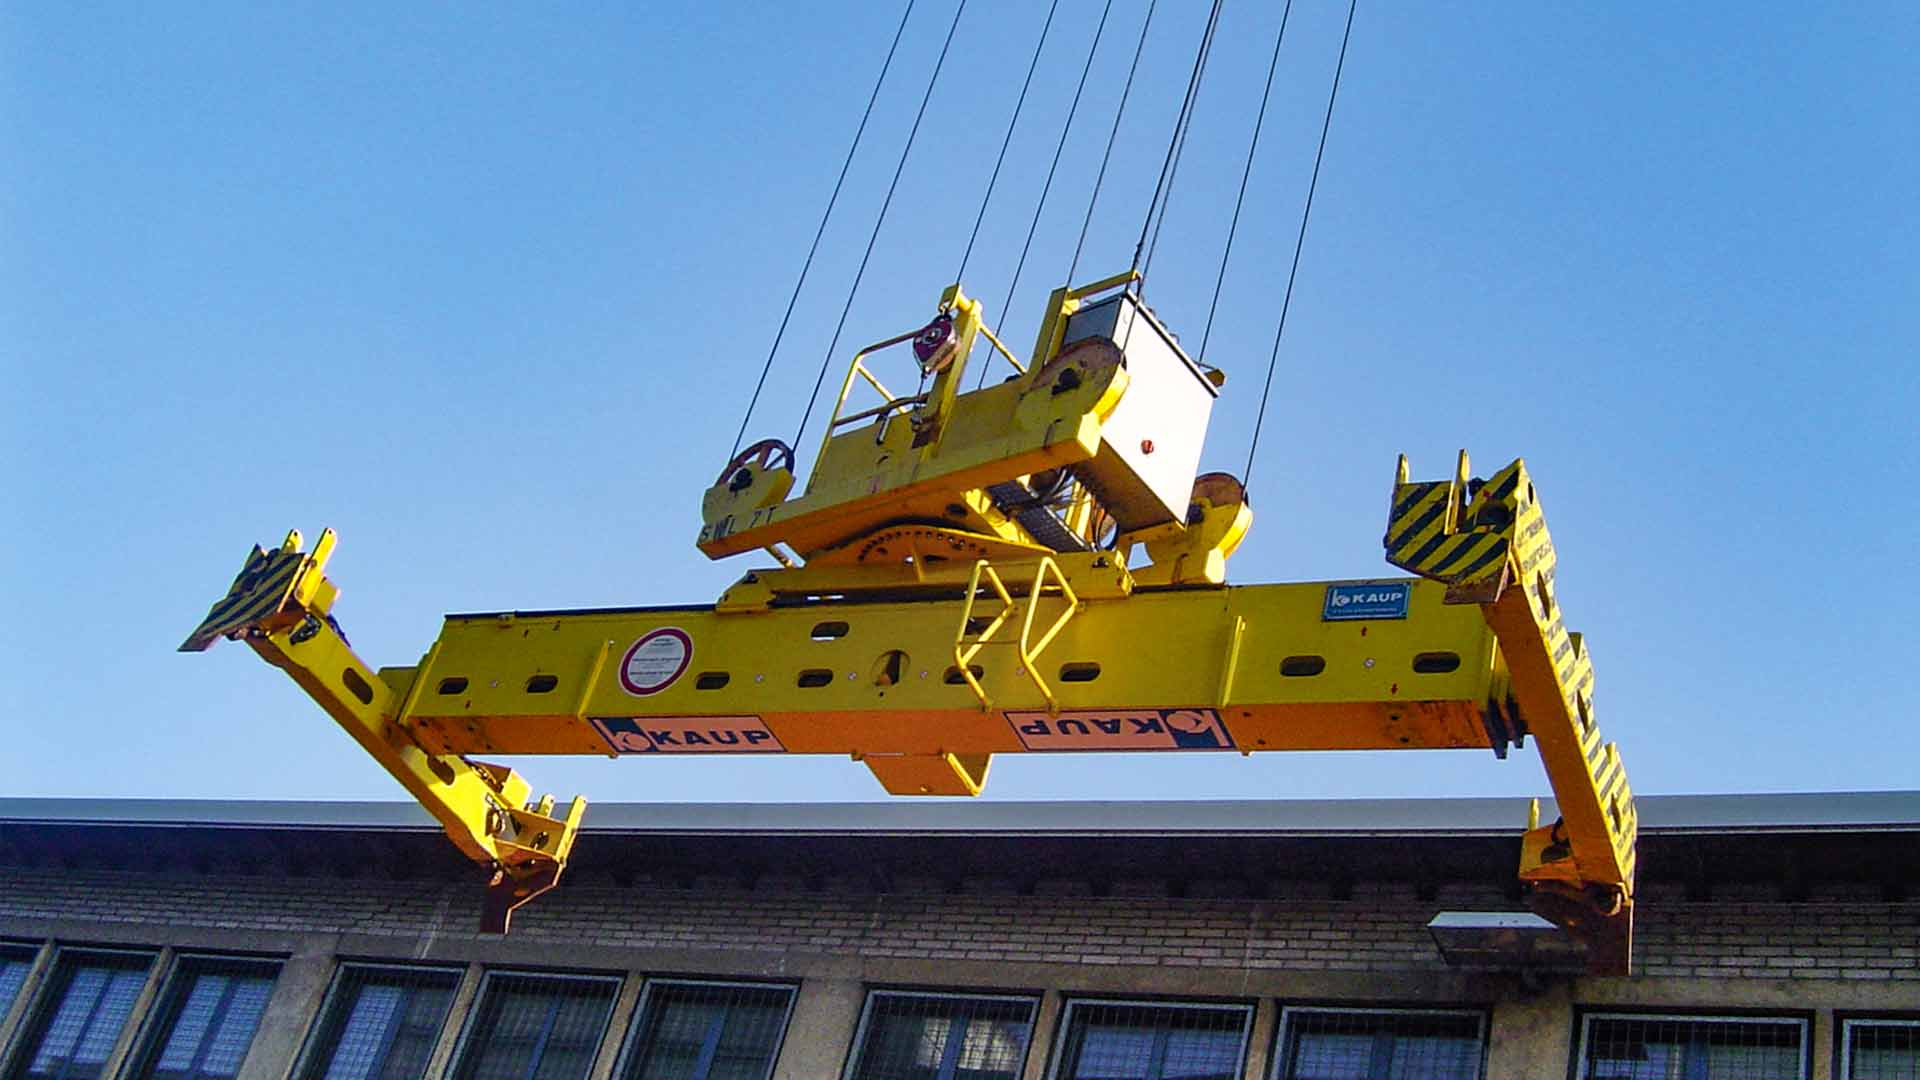 A yellow container spreader from KAUP hangs down from a crane on several wires